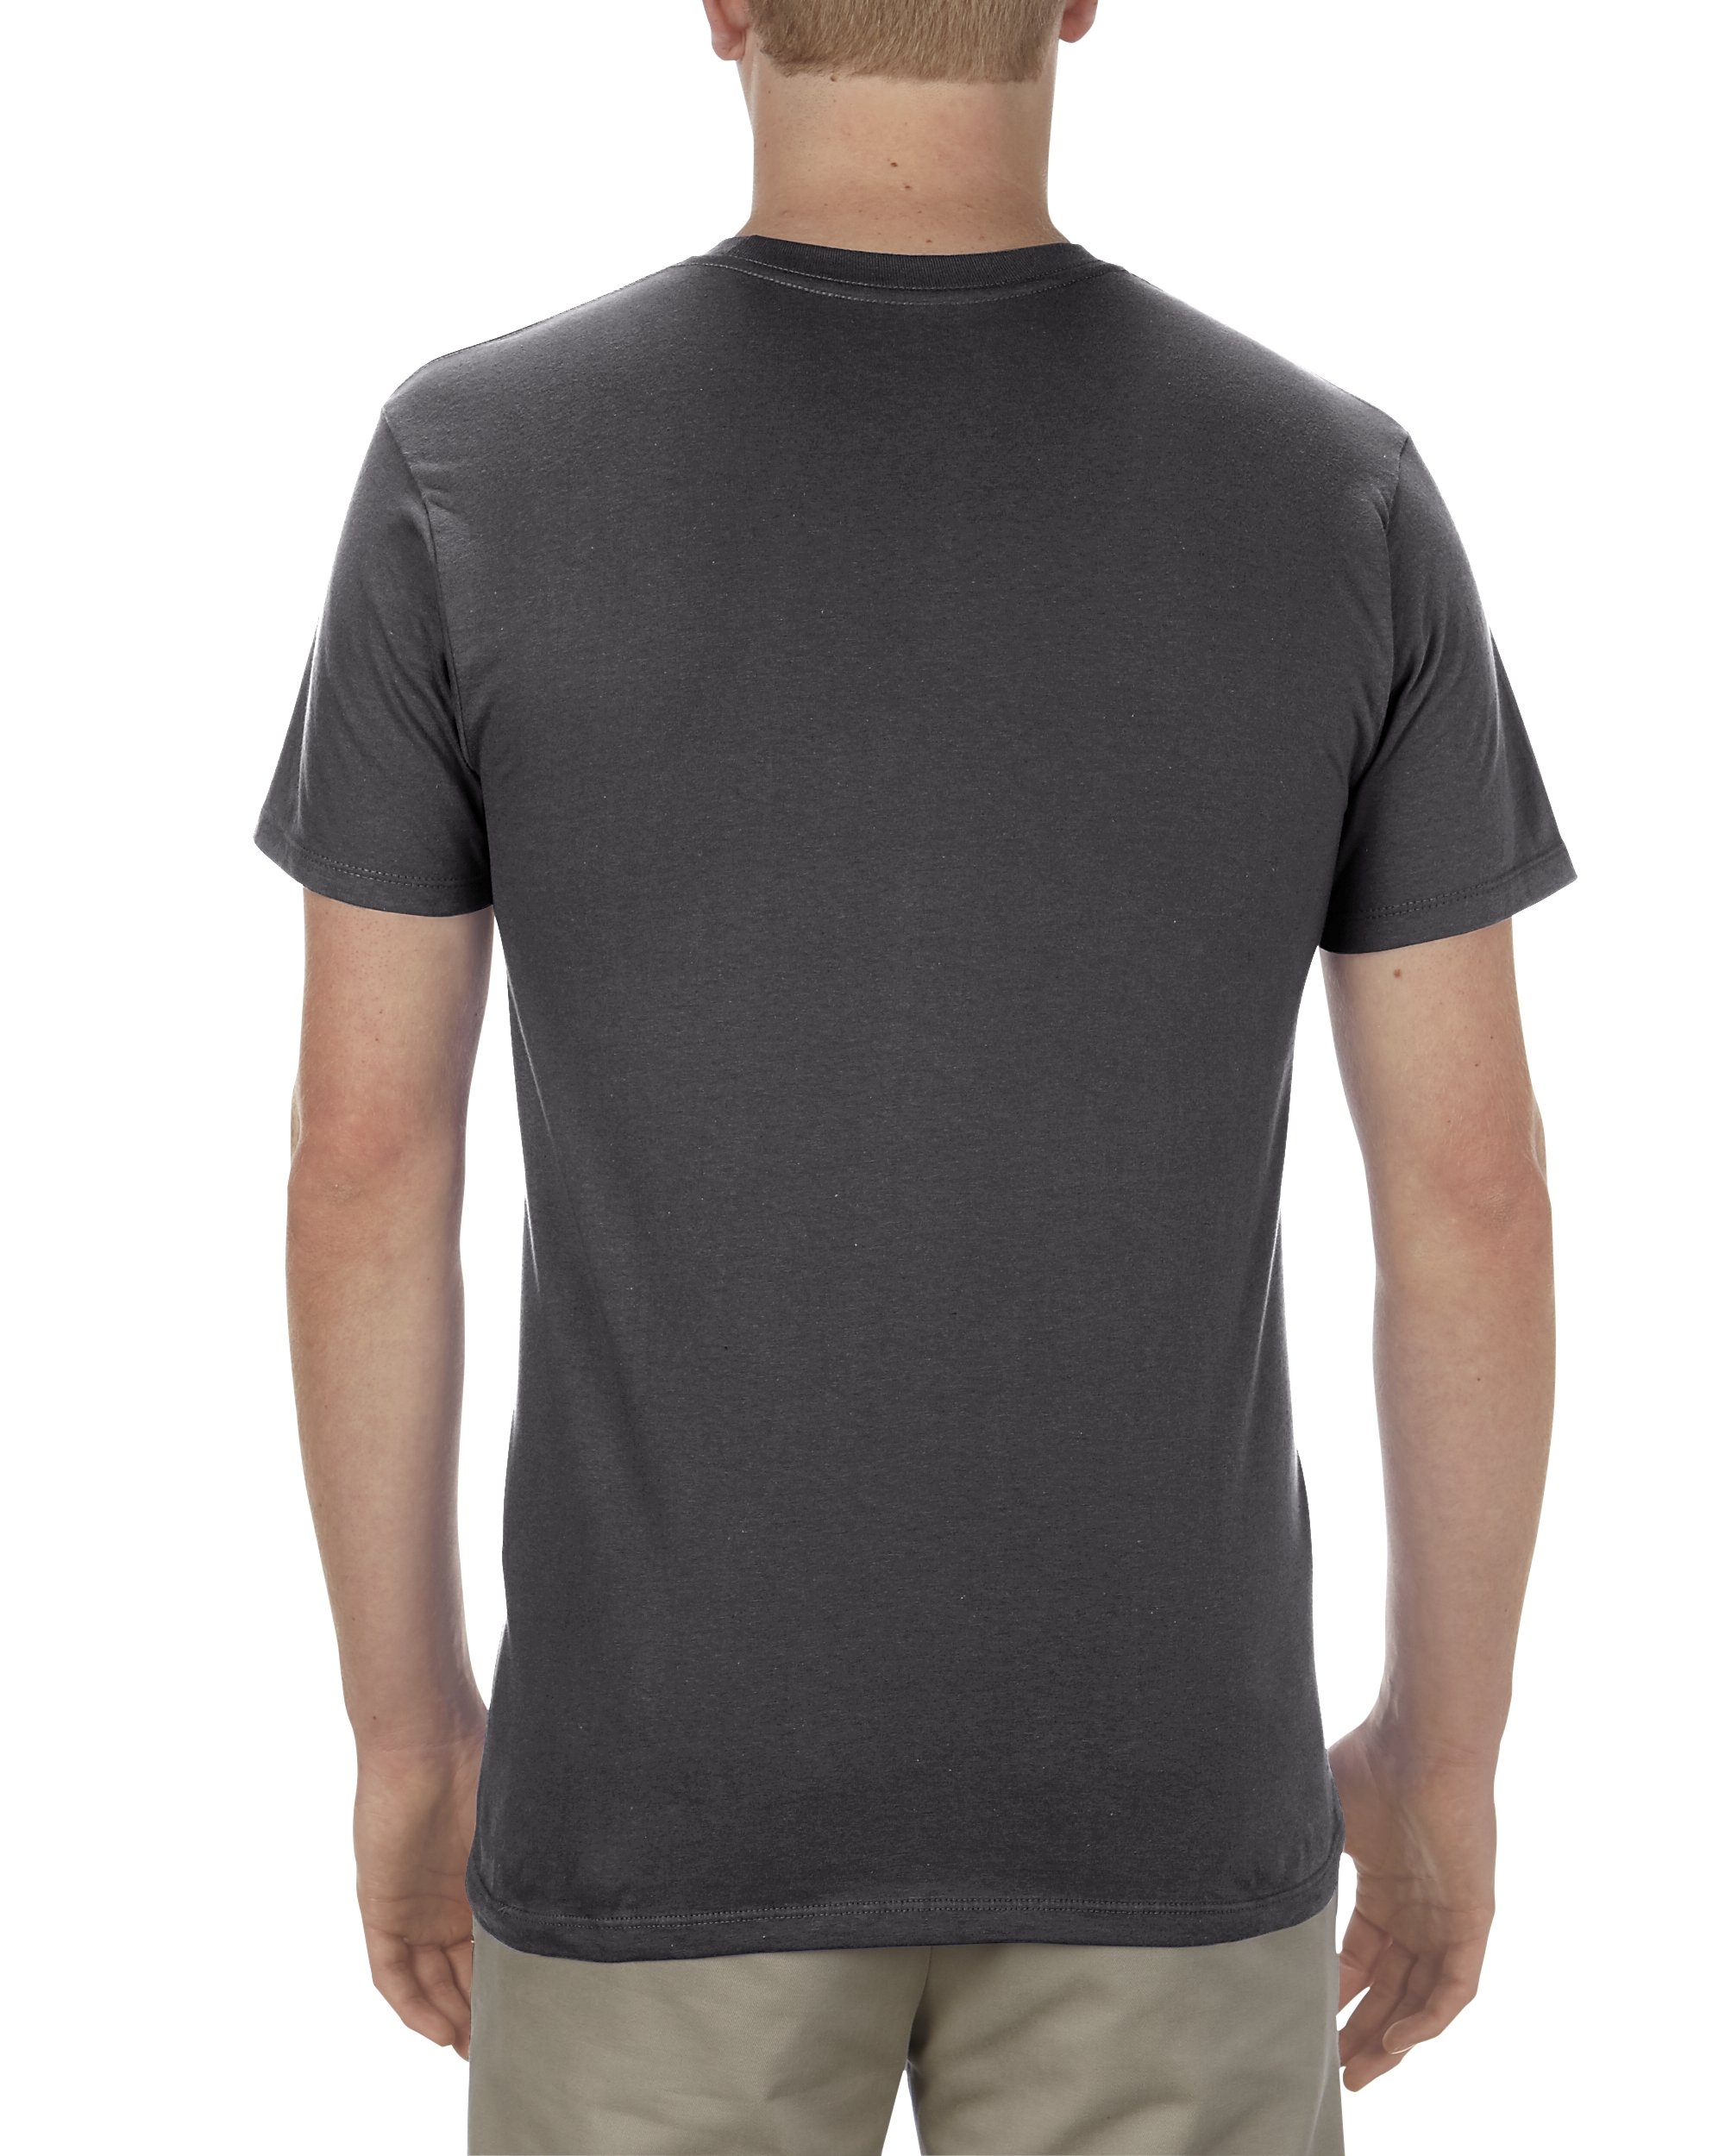 Alstyle Apparel AAA Men's Ultimate Lightweight Ringspun T-Shirt, Charcoal Heather, X-Small